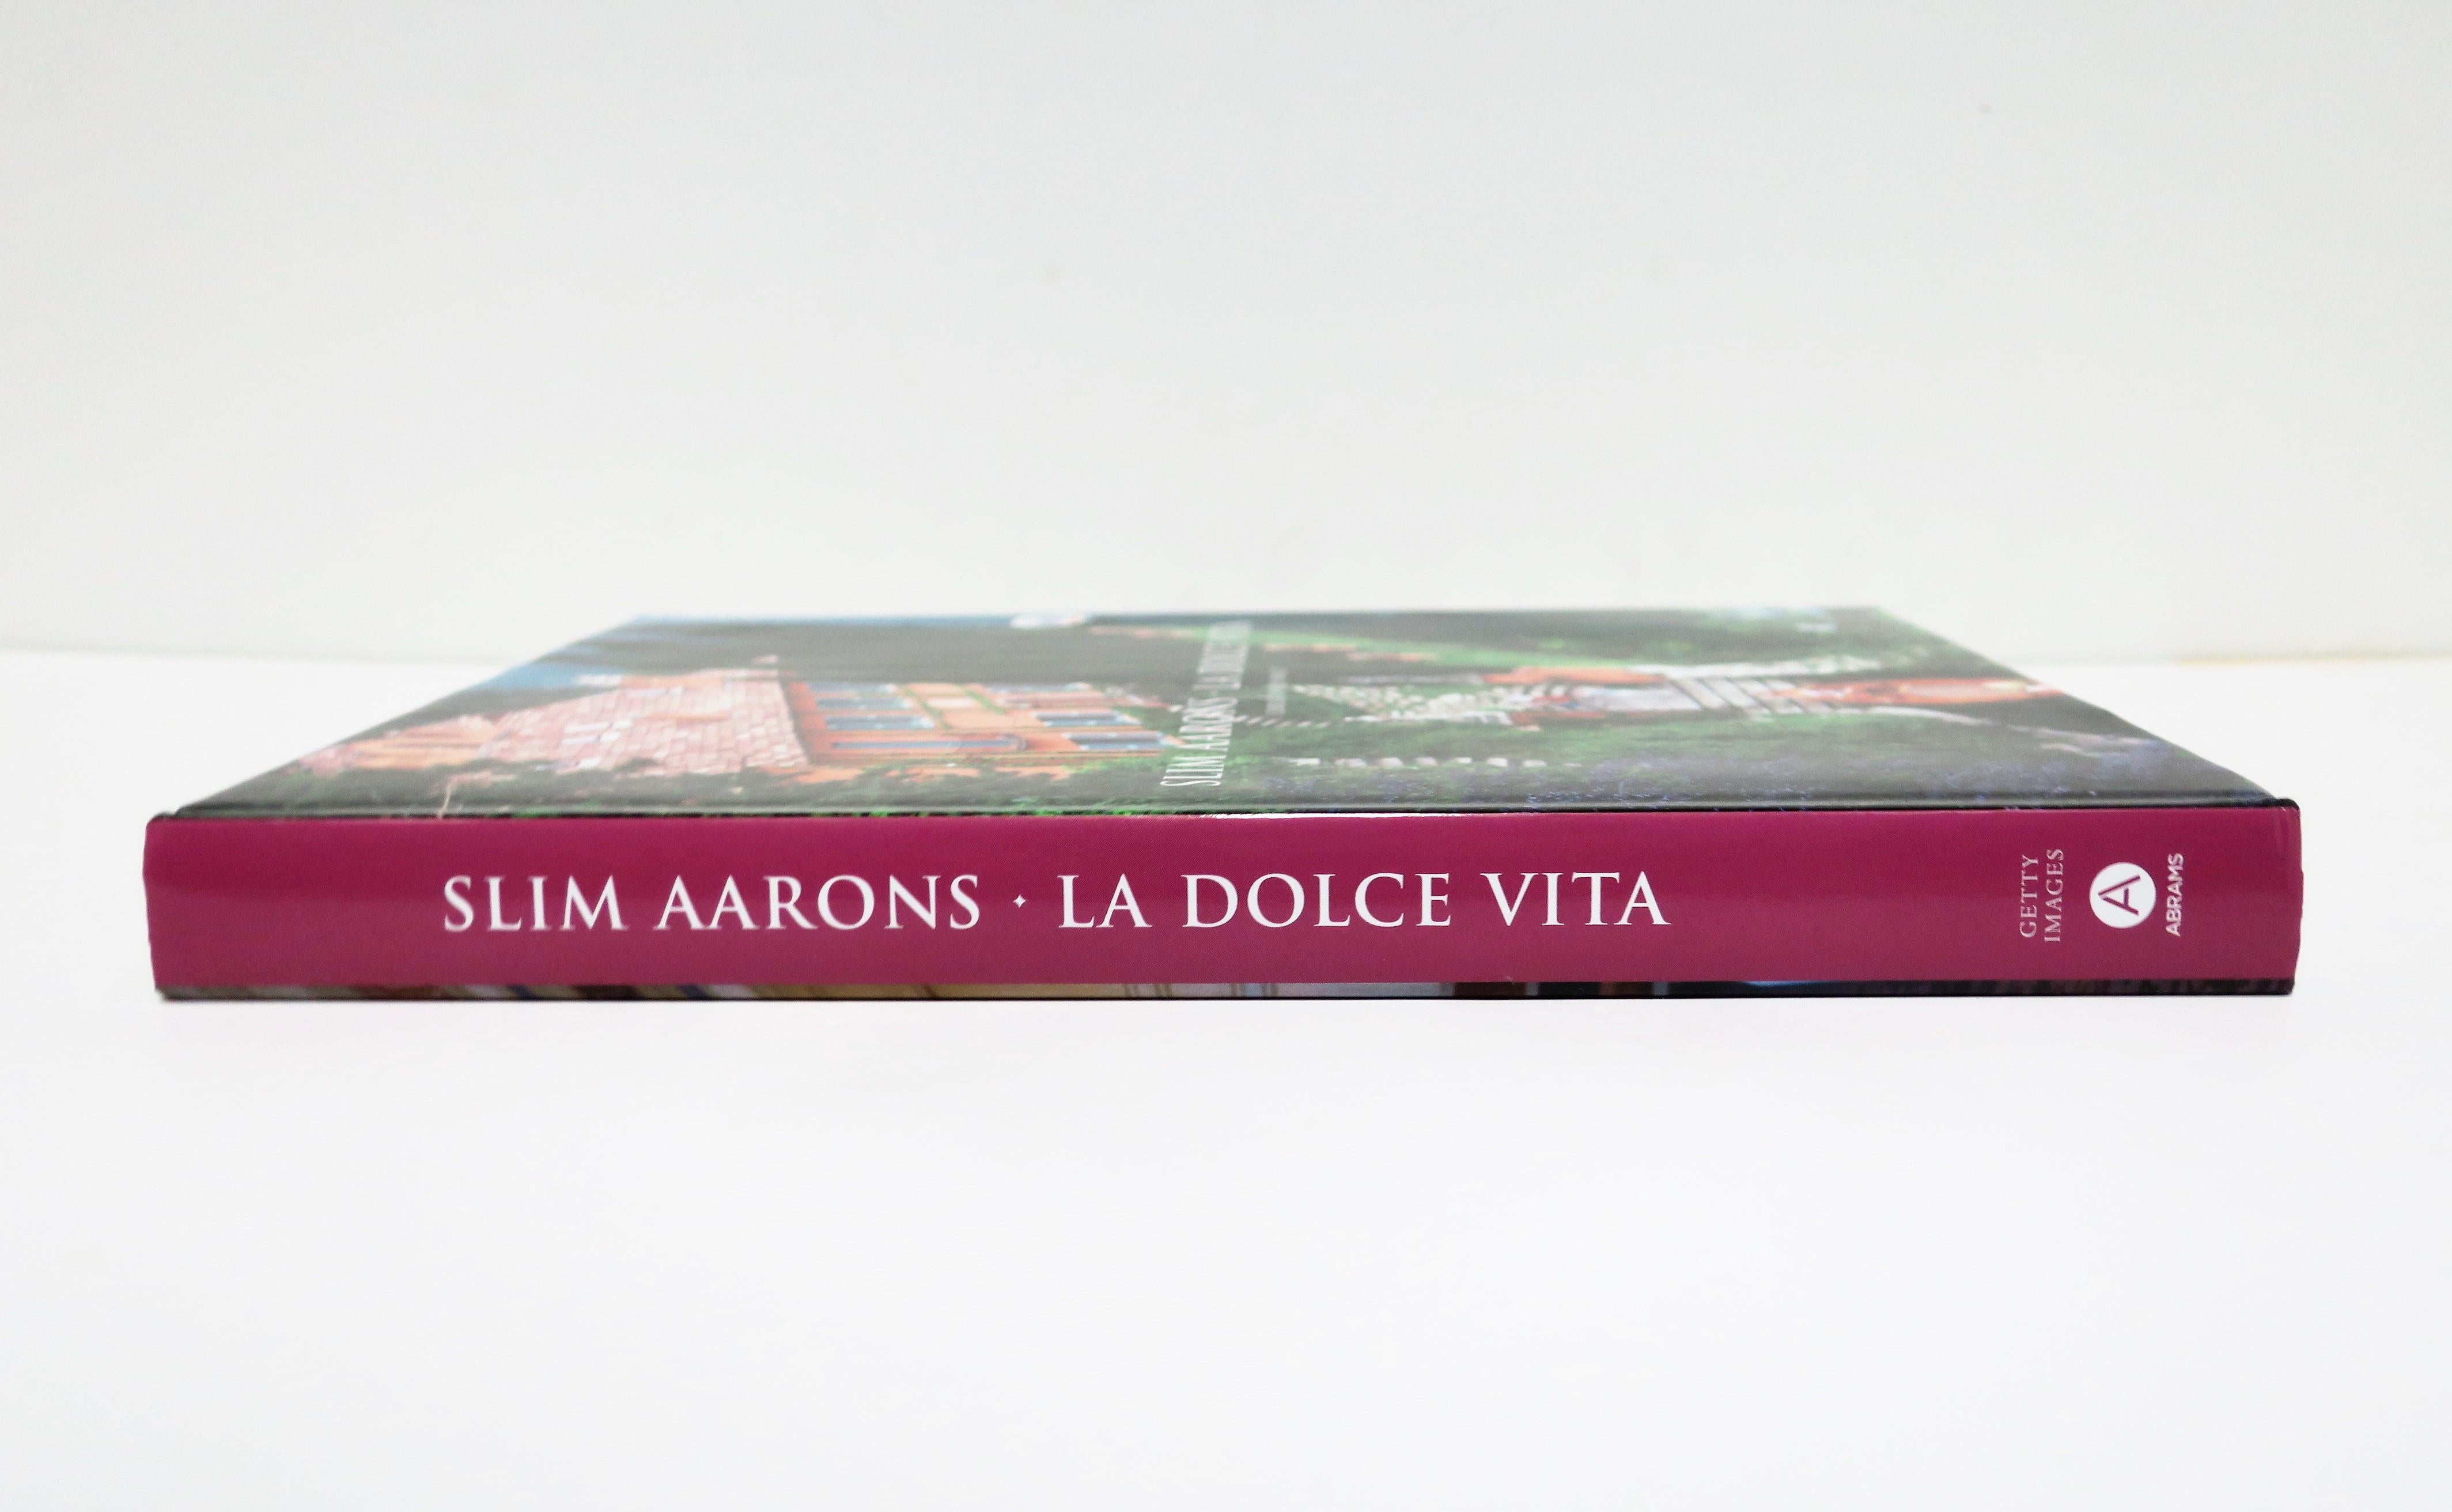 Slim Aarons La Dolce Vita Library or Coffee Table Book 9